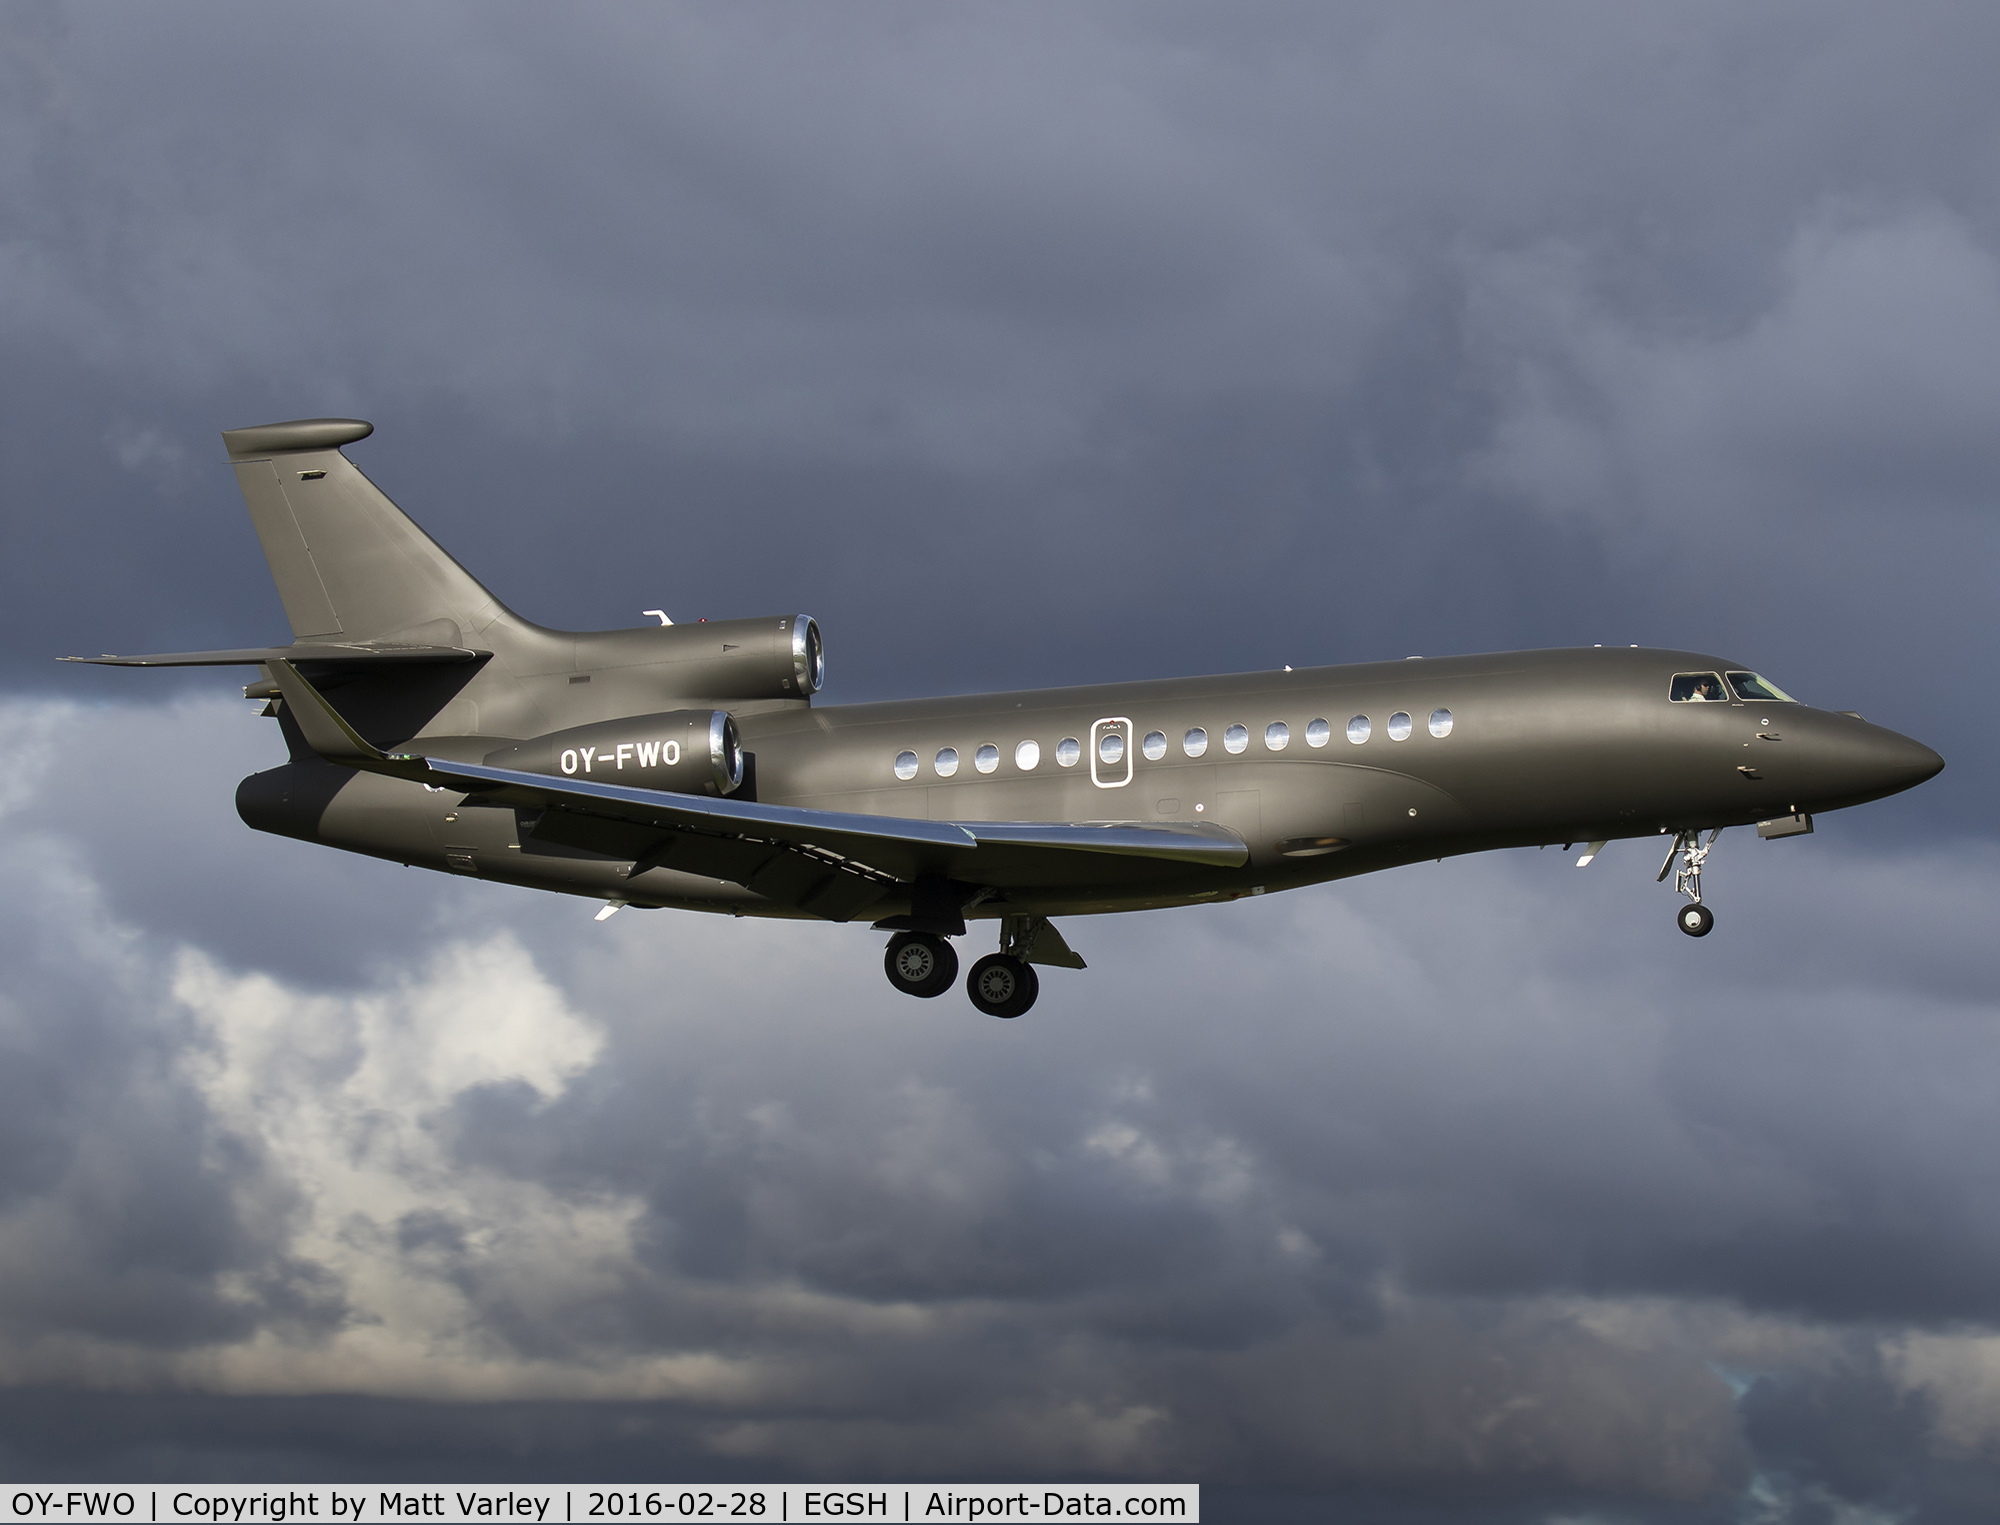 OY-FWO, 2013 Dassault Falcon 7X C/N 198, About to land on RWY 09 @ NWI, Now in a new matt Paint Scheme...